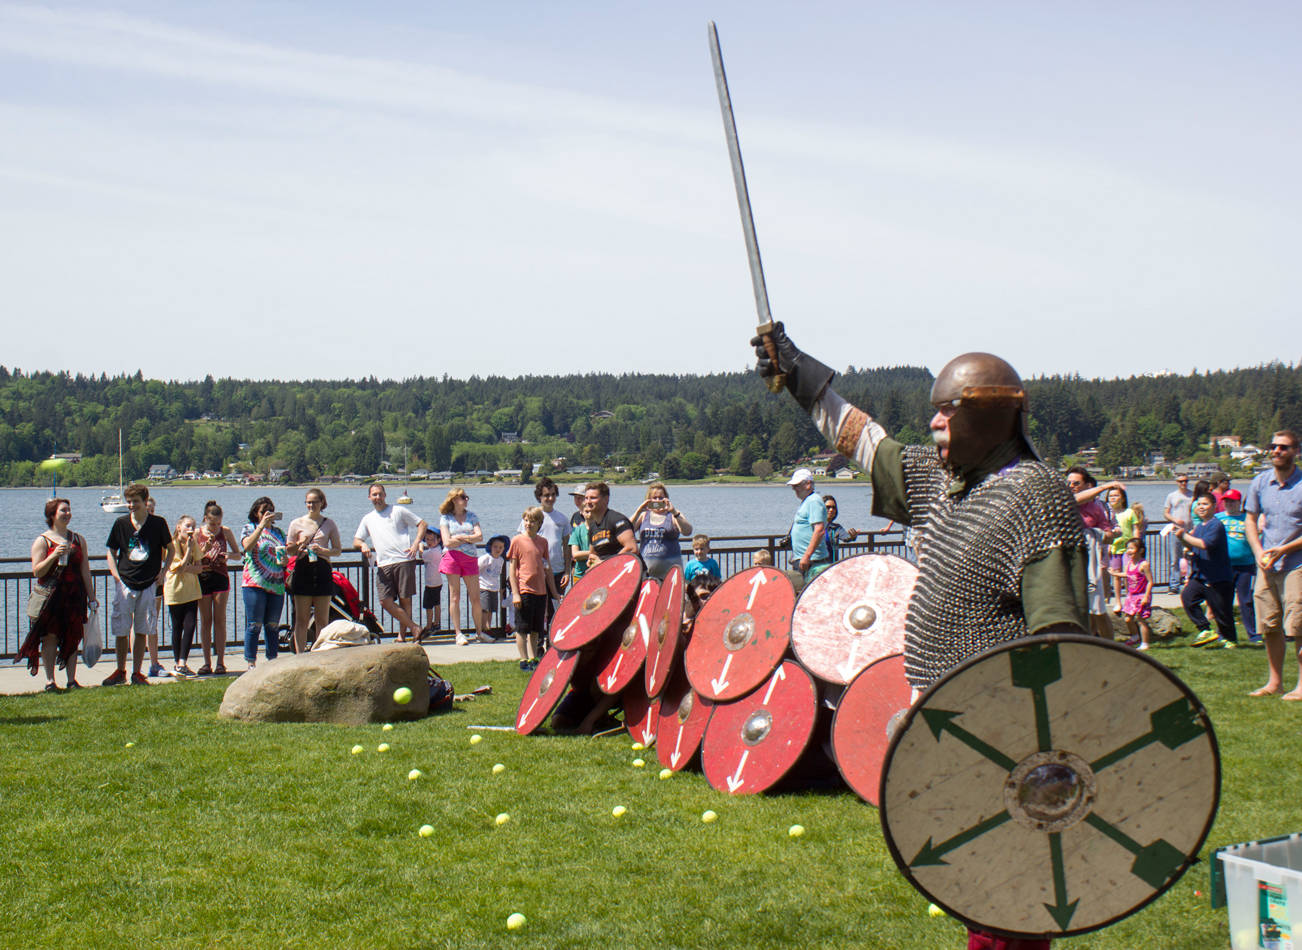 Shield wall at Viking Fest is a test of strength and mettle| Photo gallery